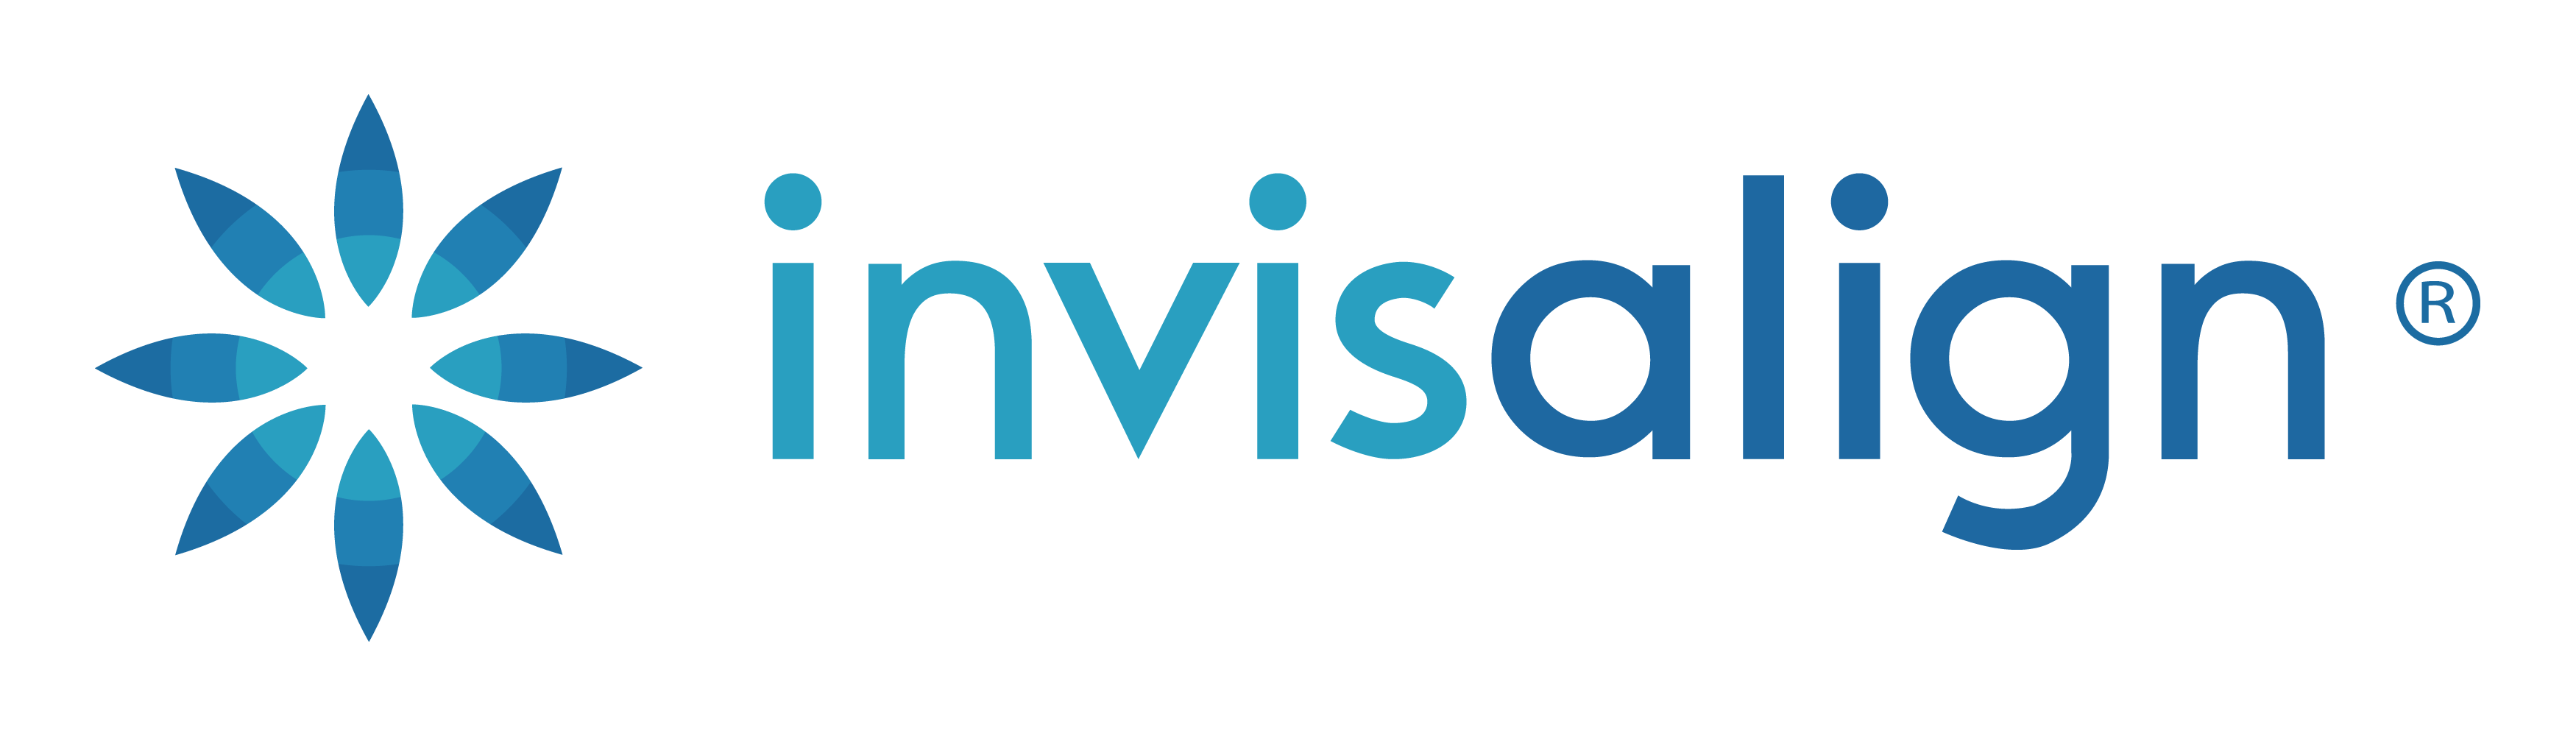  Align Technology’s Invisalign brand becomes the official smile of the New England Patriots and New England Revolution